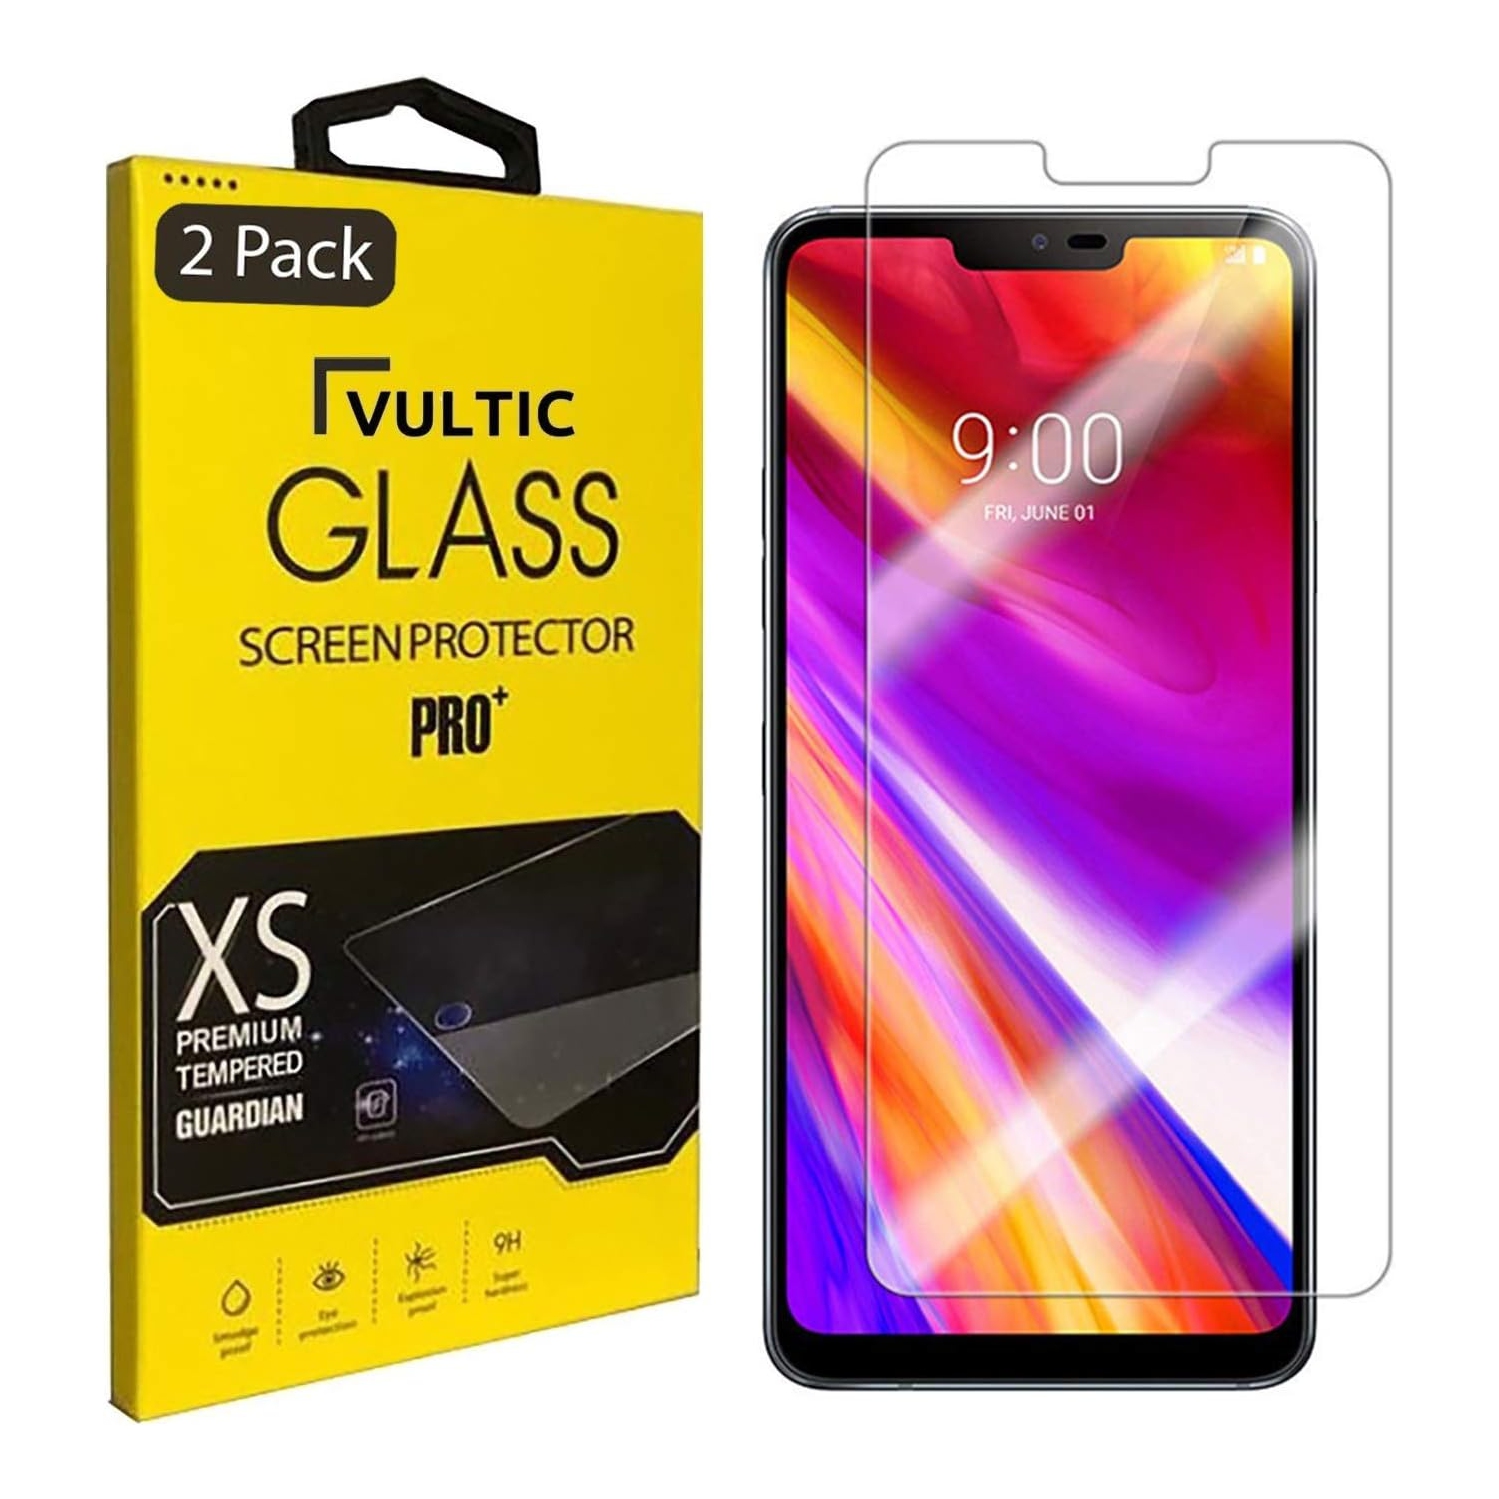 [2 Pack] Screen Protector for LG G7 ThinQ/LG G7 One/LG G8 ThinQ [Case Friendly], Tempered Glass Film Cover